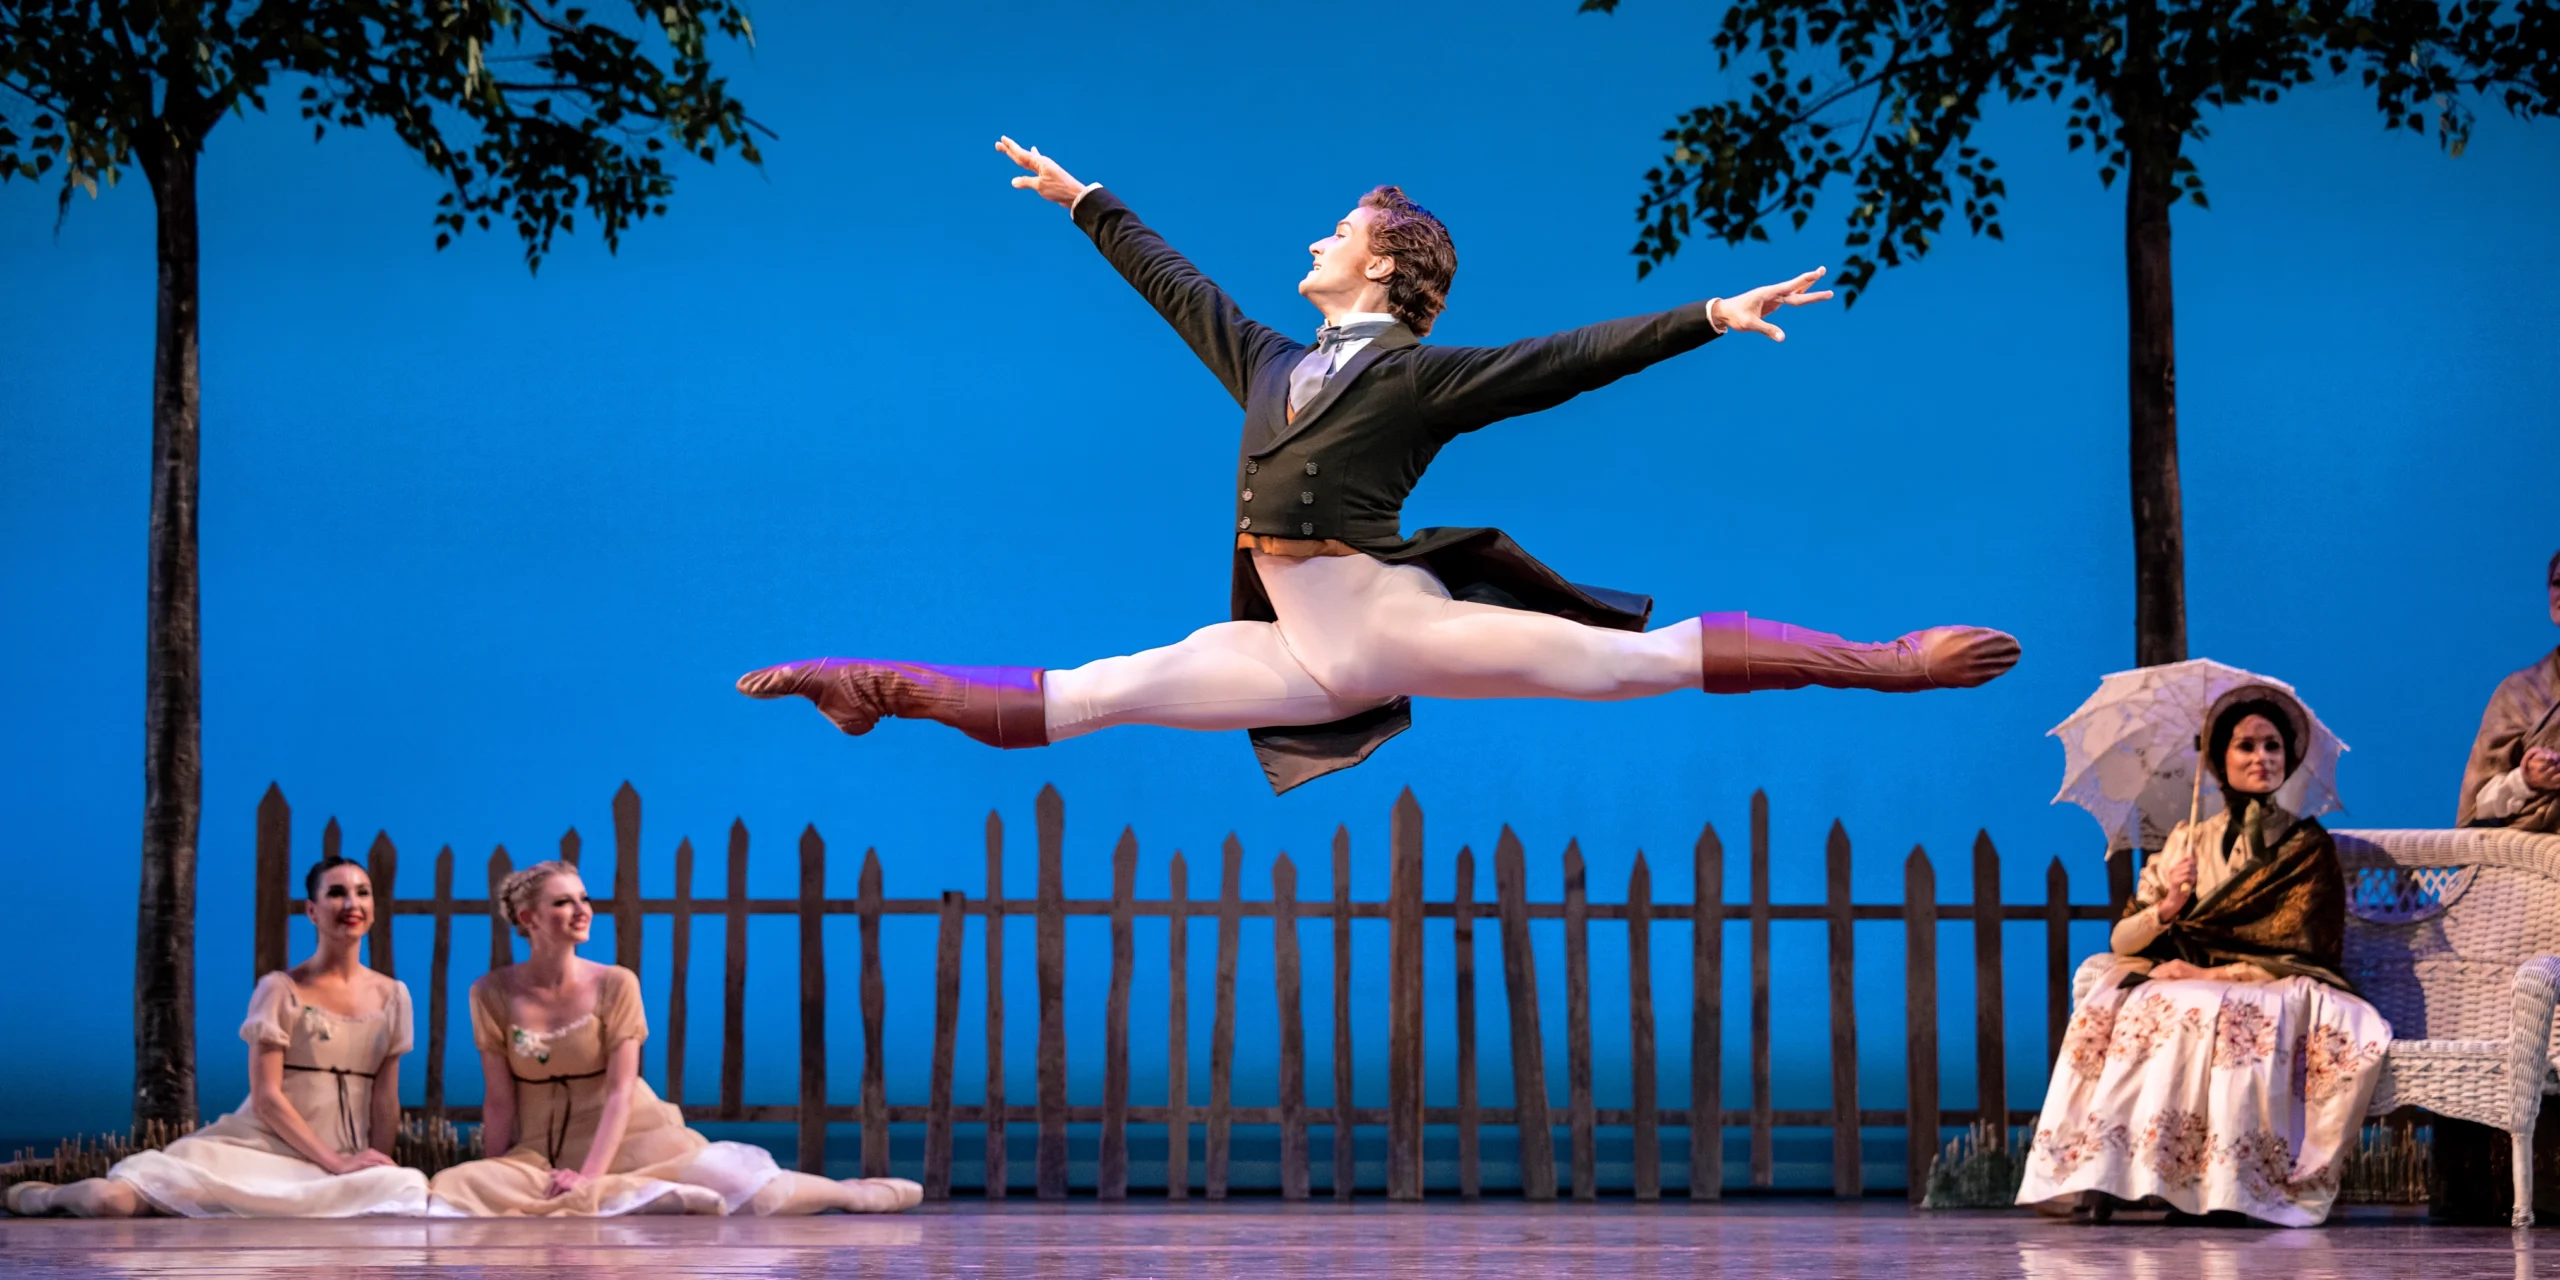 Jordan Veit leaps across the stage towards stage right during a performance of Onegin, his arms in first position. He wears a gray tie, dark sport jacket with tails, white tights, and brown ballet boots. He dances in front of a set that shows a picket fence and two trees in front of a blue sky. Two women in long white dresses sit on the ground upstage and watch Veit, while another sits on a wicker loveseat upstage left, holding a parasol and wearing a long dress, a shawl around her shoulders, and a bonnet.